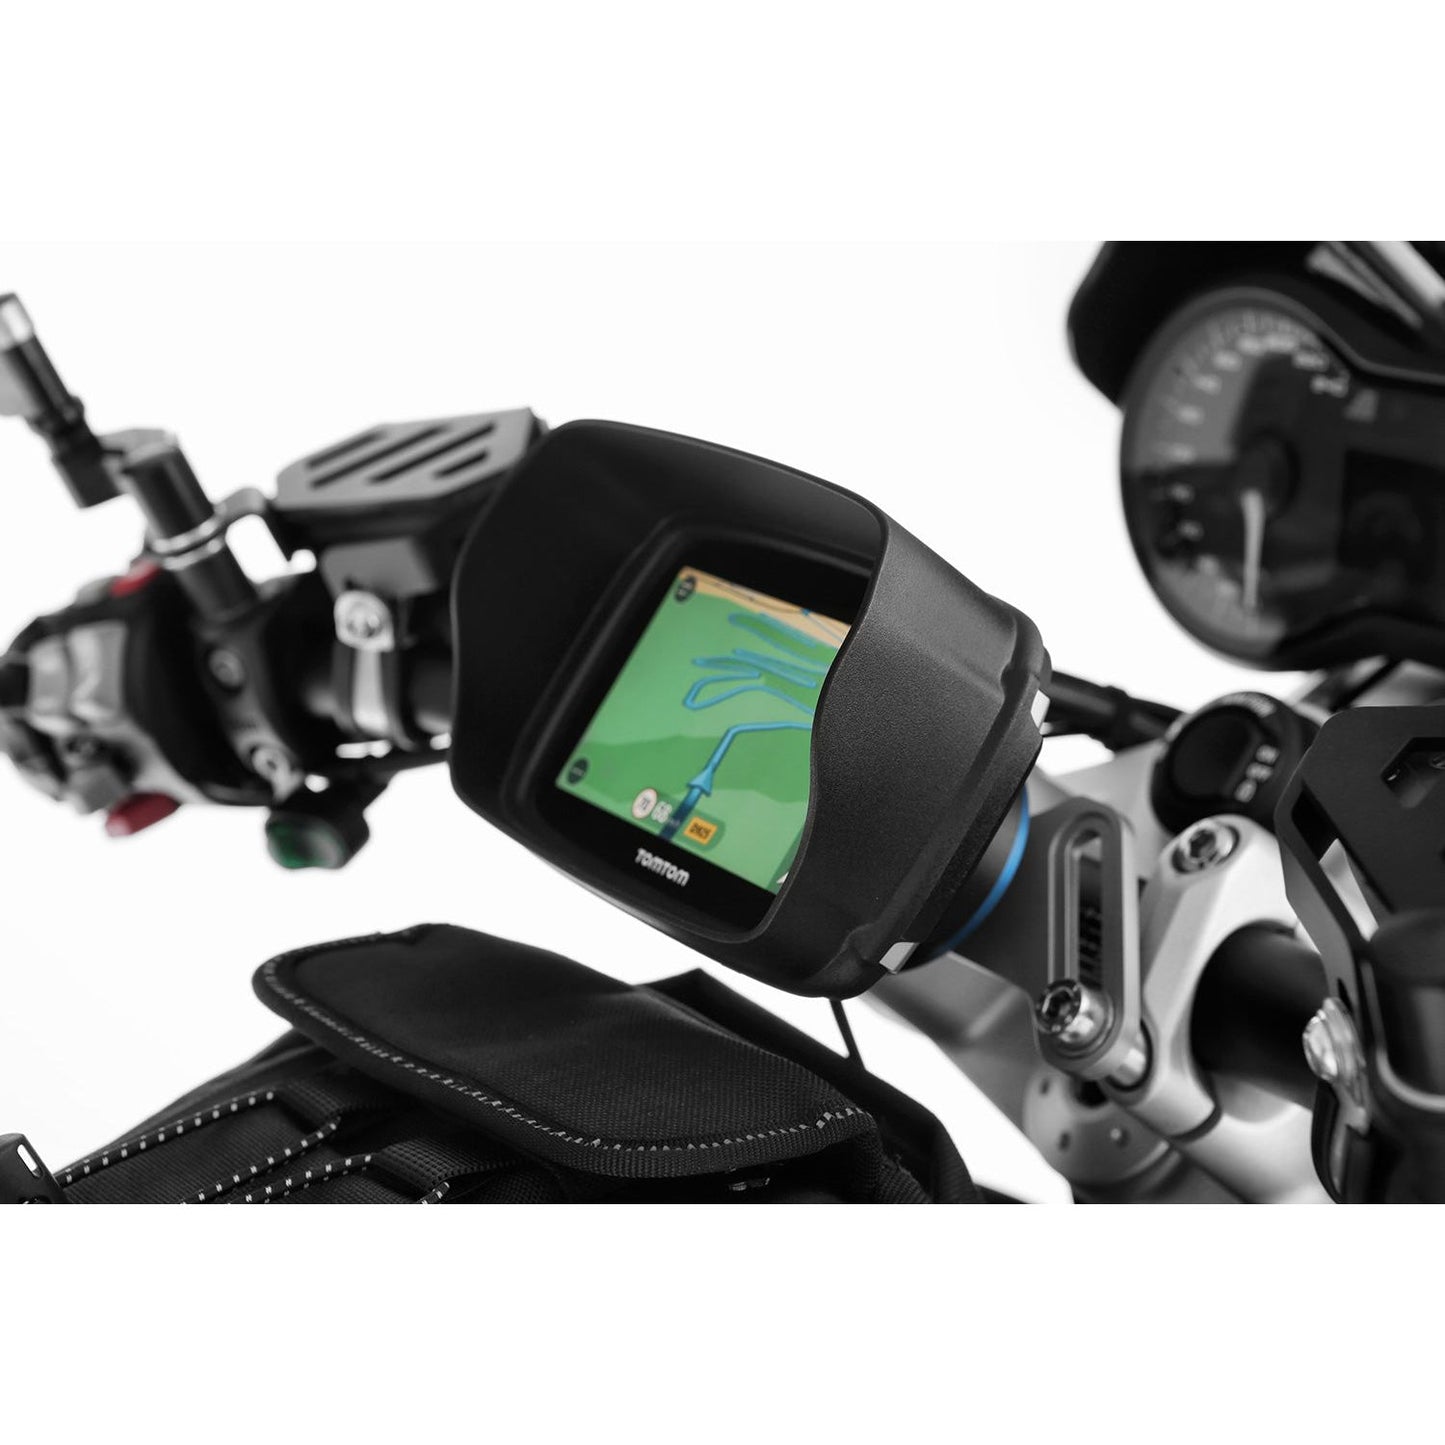 Wunderlich visière protectrice noire pour TomTom Rider (21071-002) - EdTools